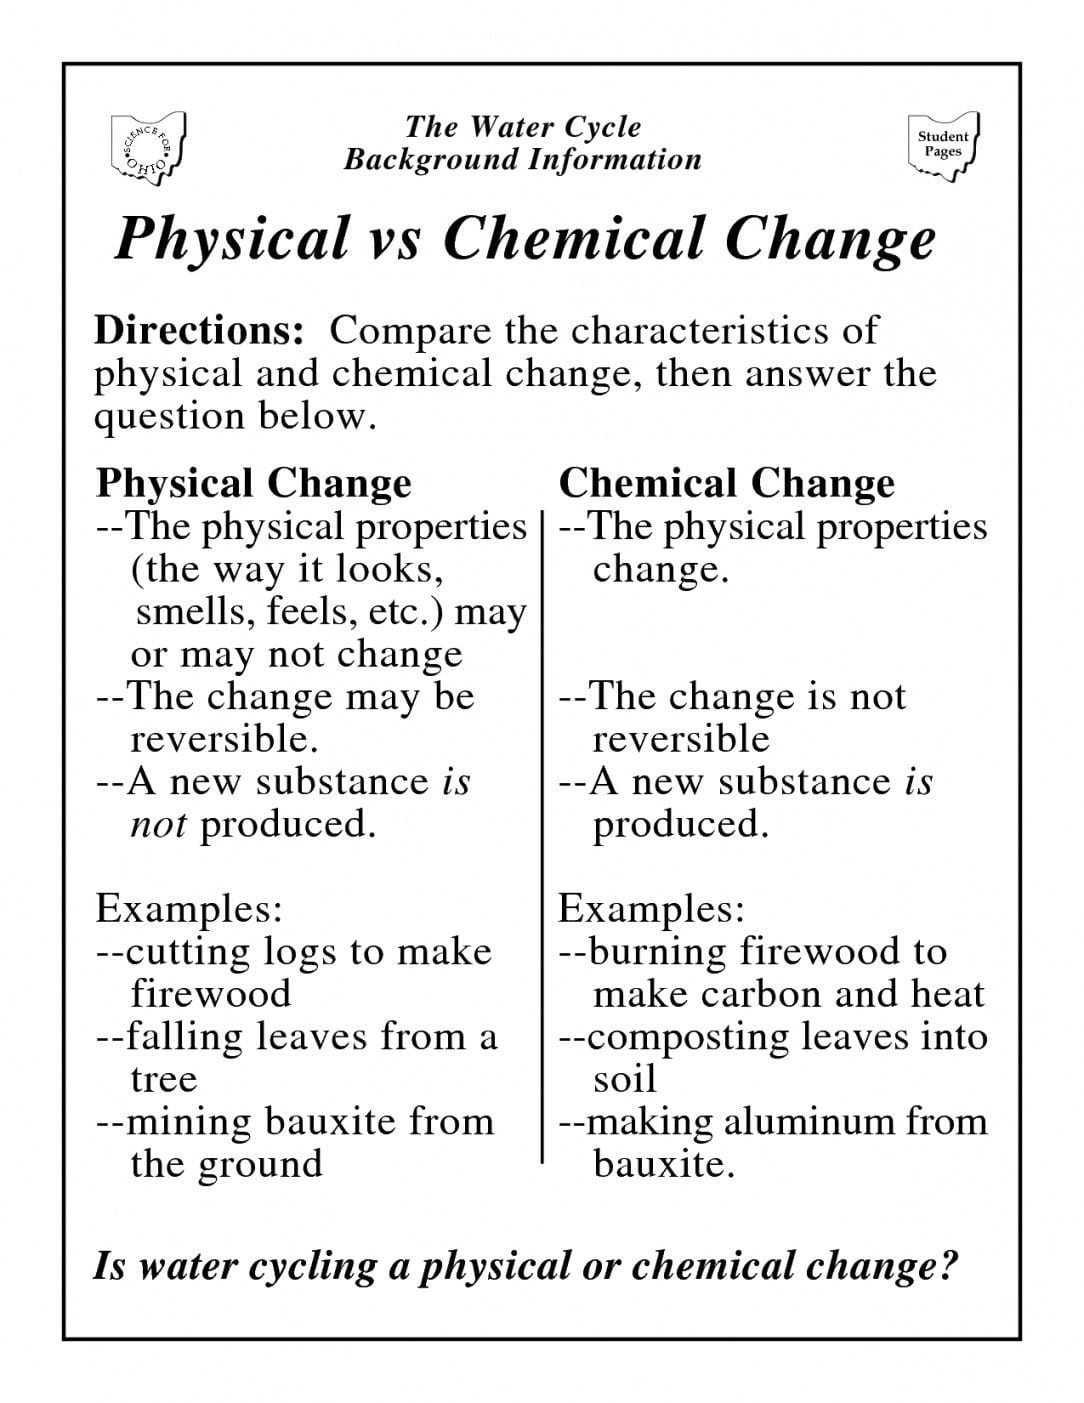 view-source-image-matter-science-physical-and-chemical-properties-physical-science